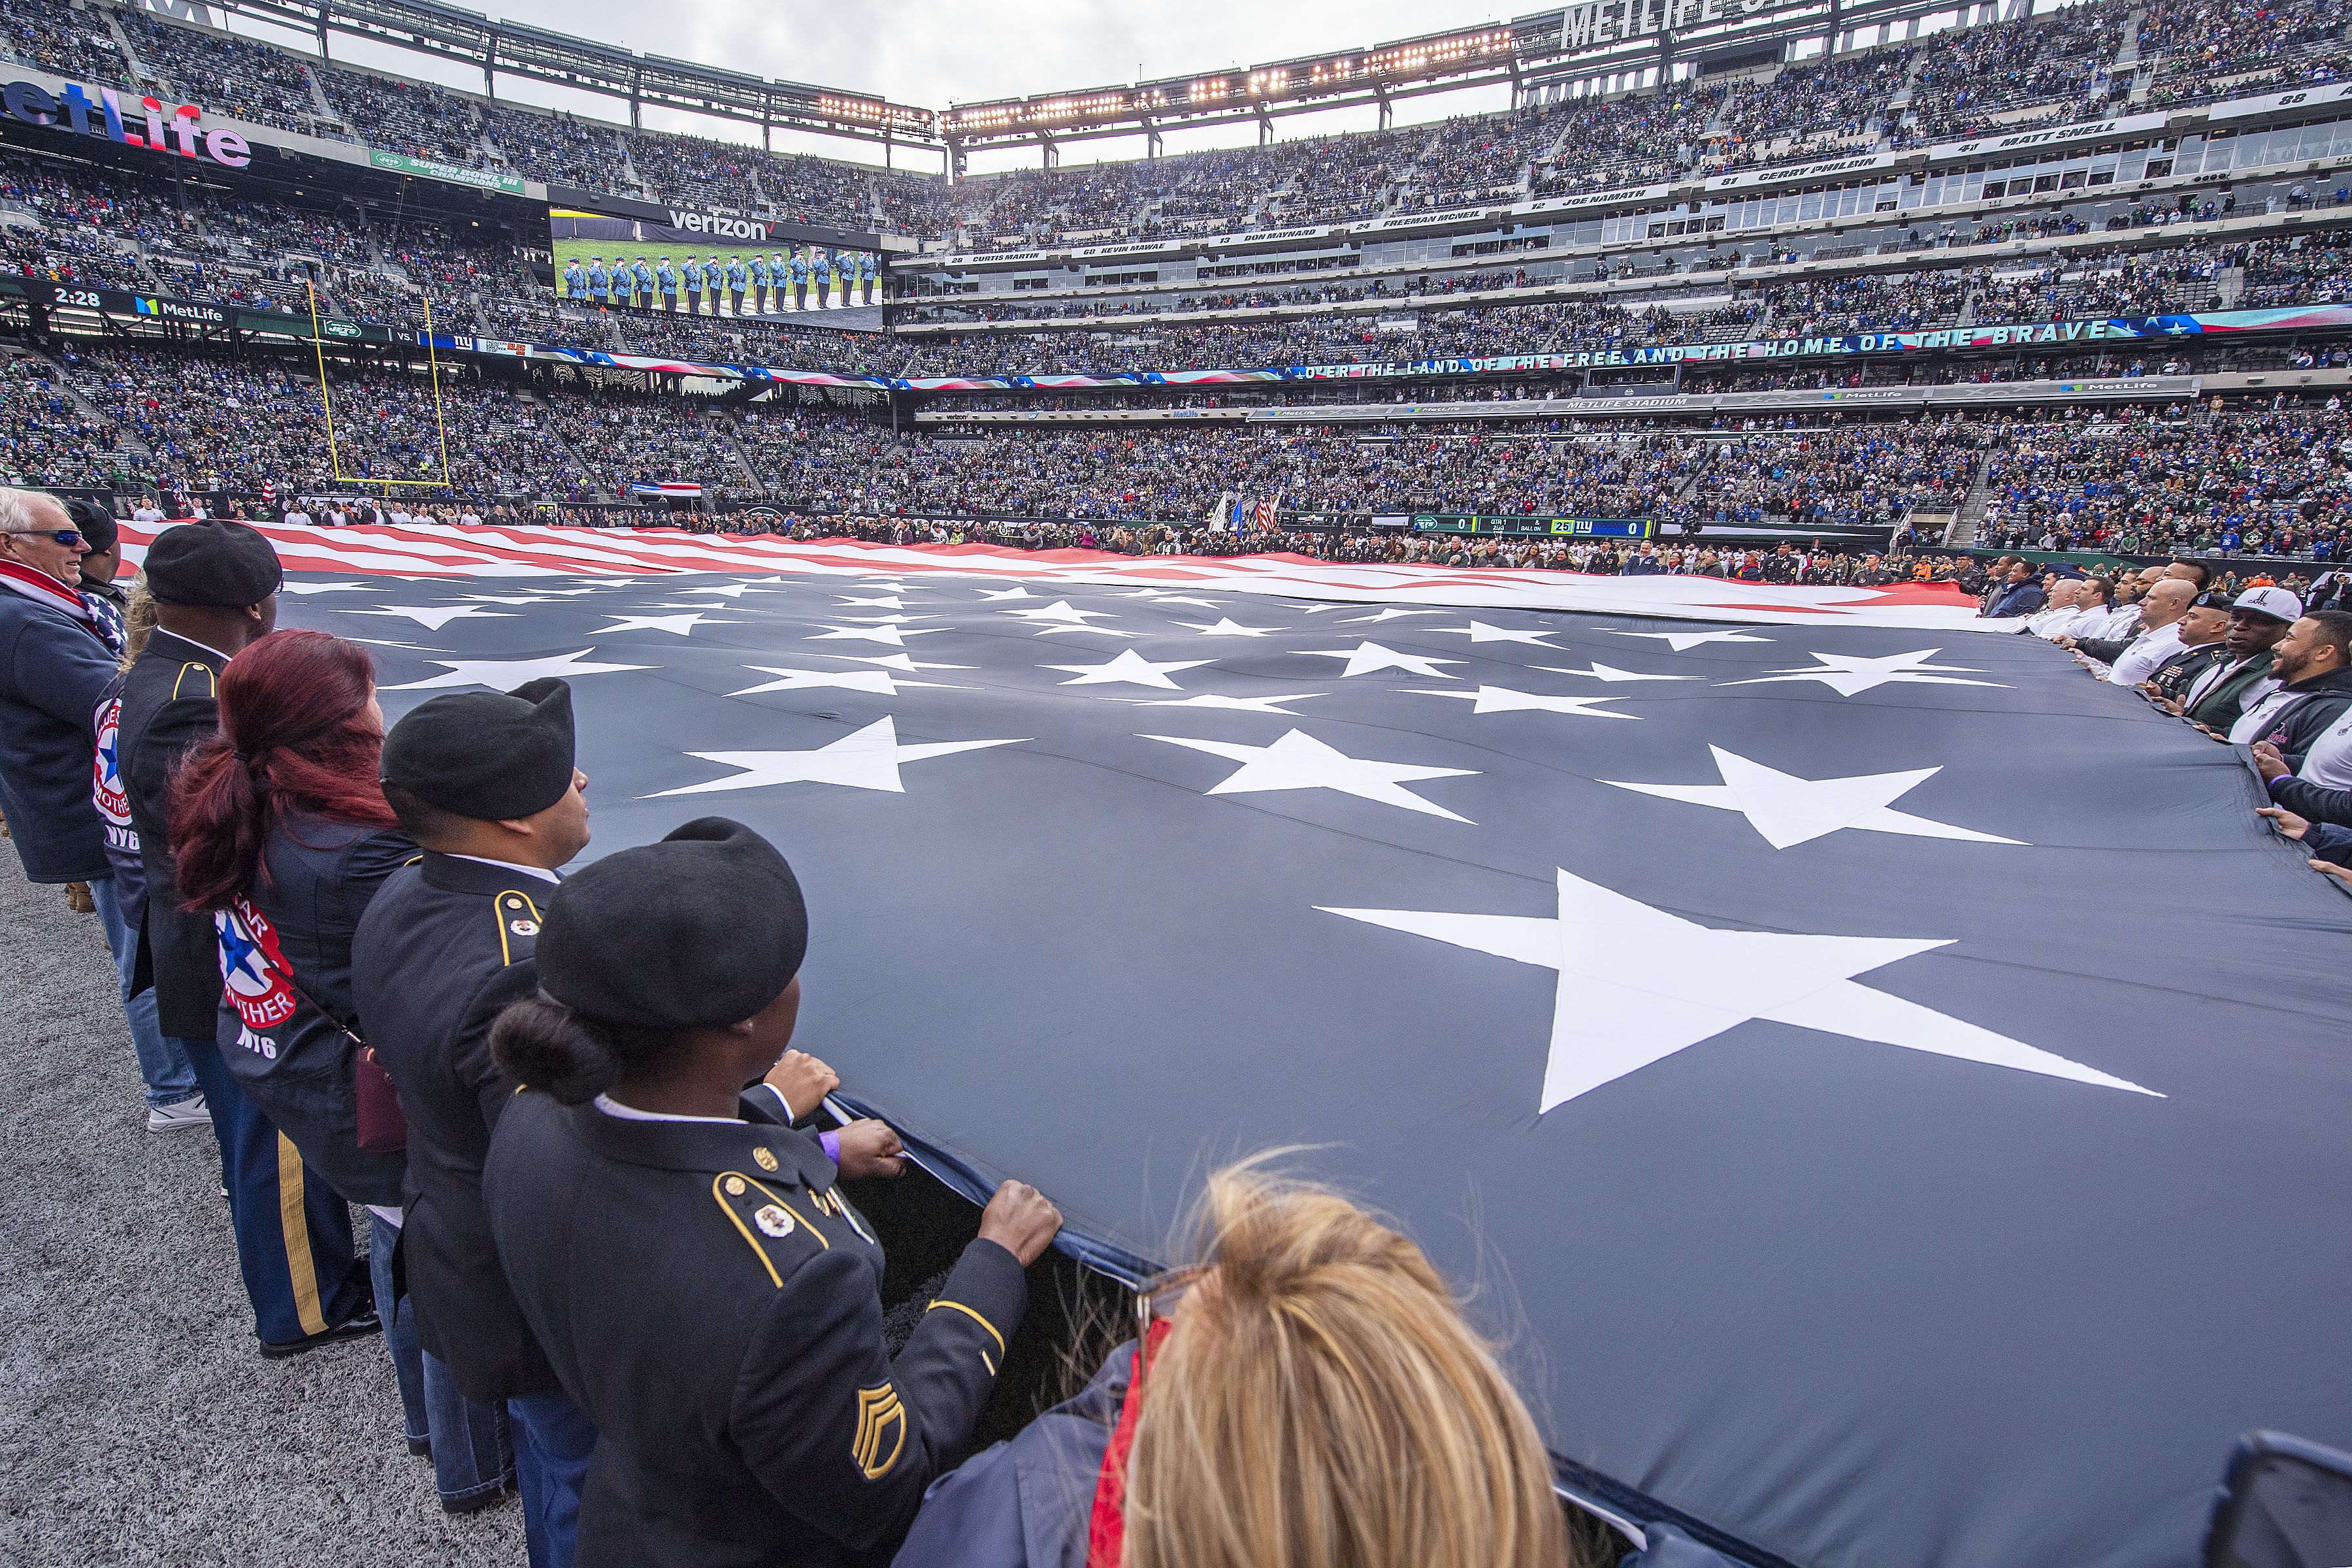 Sag Harbor Gold Star Mother JoAnn Lyles joined several hundred Gold- and Blue-Star Familiesto hold a giant American flag that was presented as part of a pre-game 